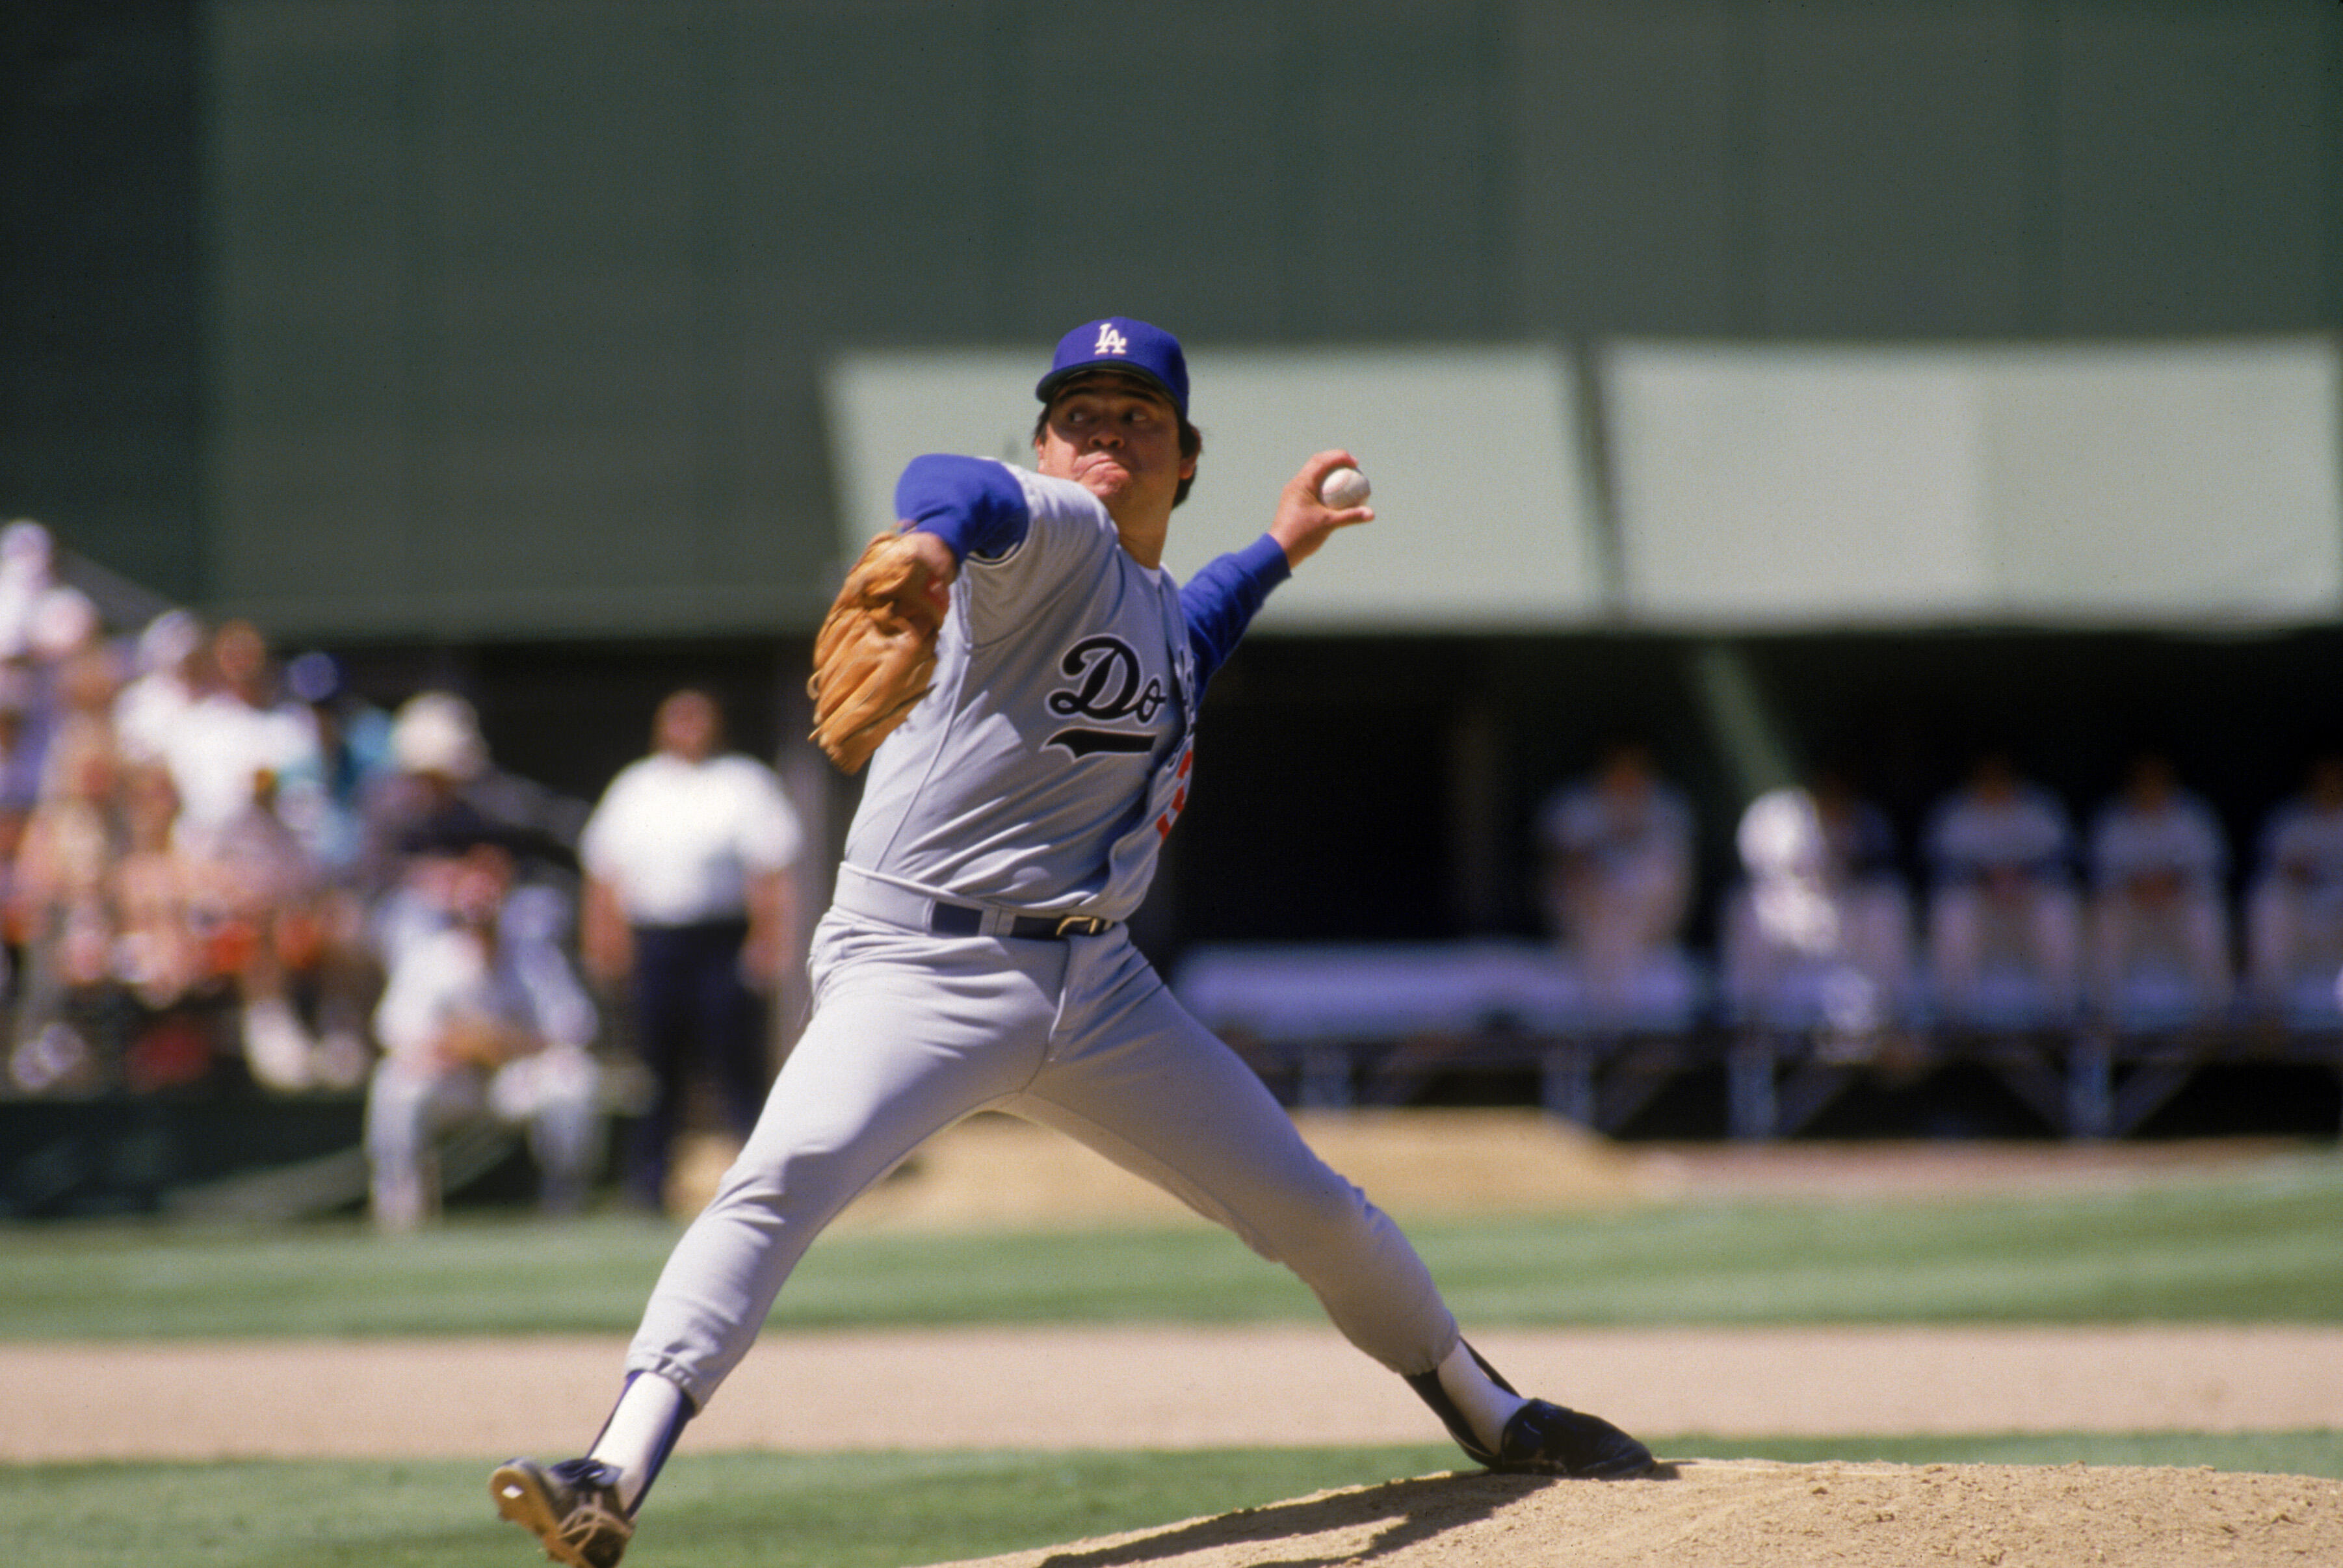 SAN DIEGO - 1987: Pitcher Fernando Valenzuela #34 of the Los Angeles Dodgers winds up for a pitch during a 1987 MLB season game against the San Diego Padres at Jack Murphy Stadium in San Diego, California. (Photo by: Stephen Dunn/Getty Images)